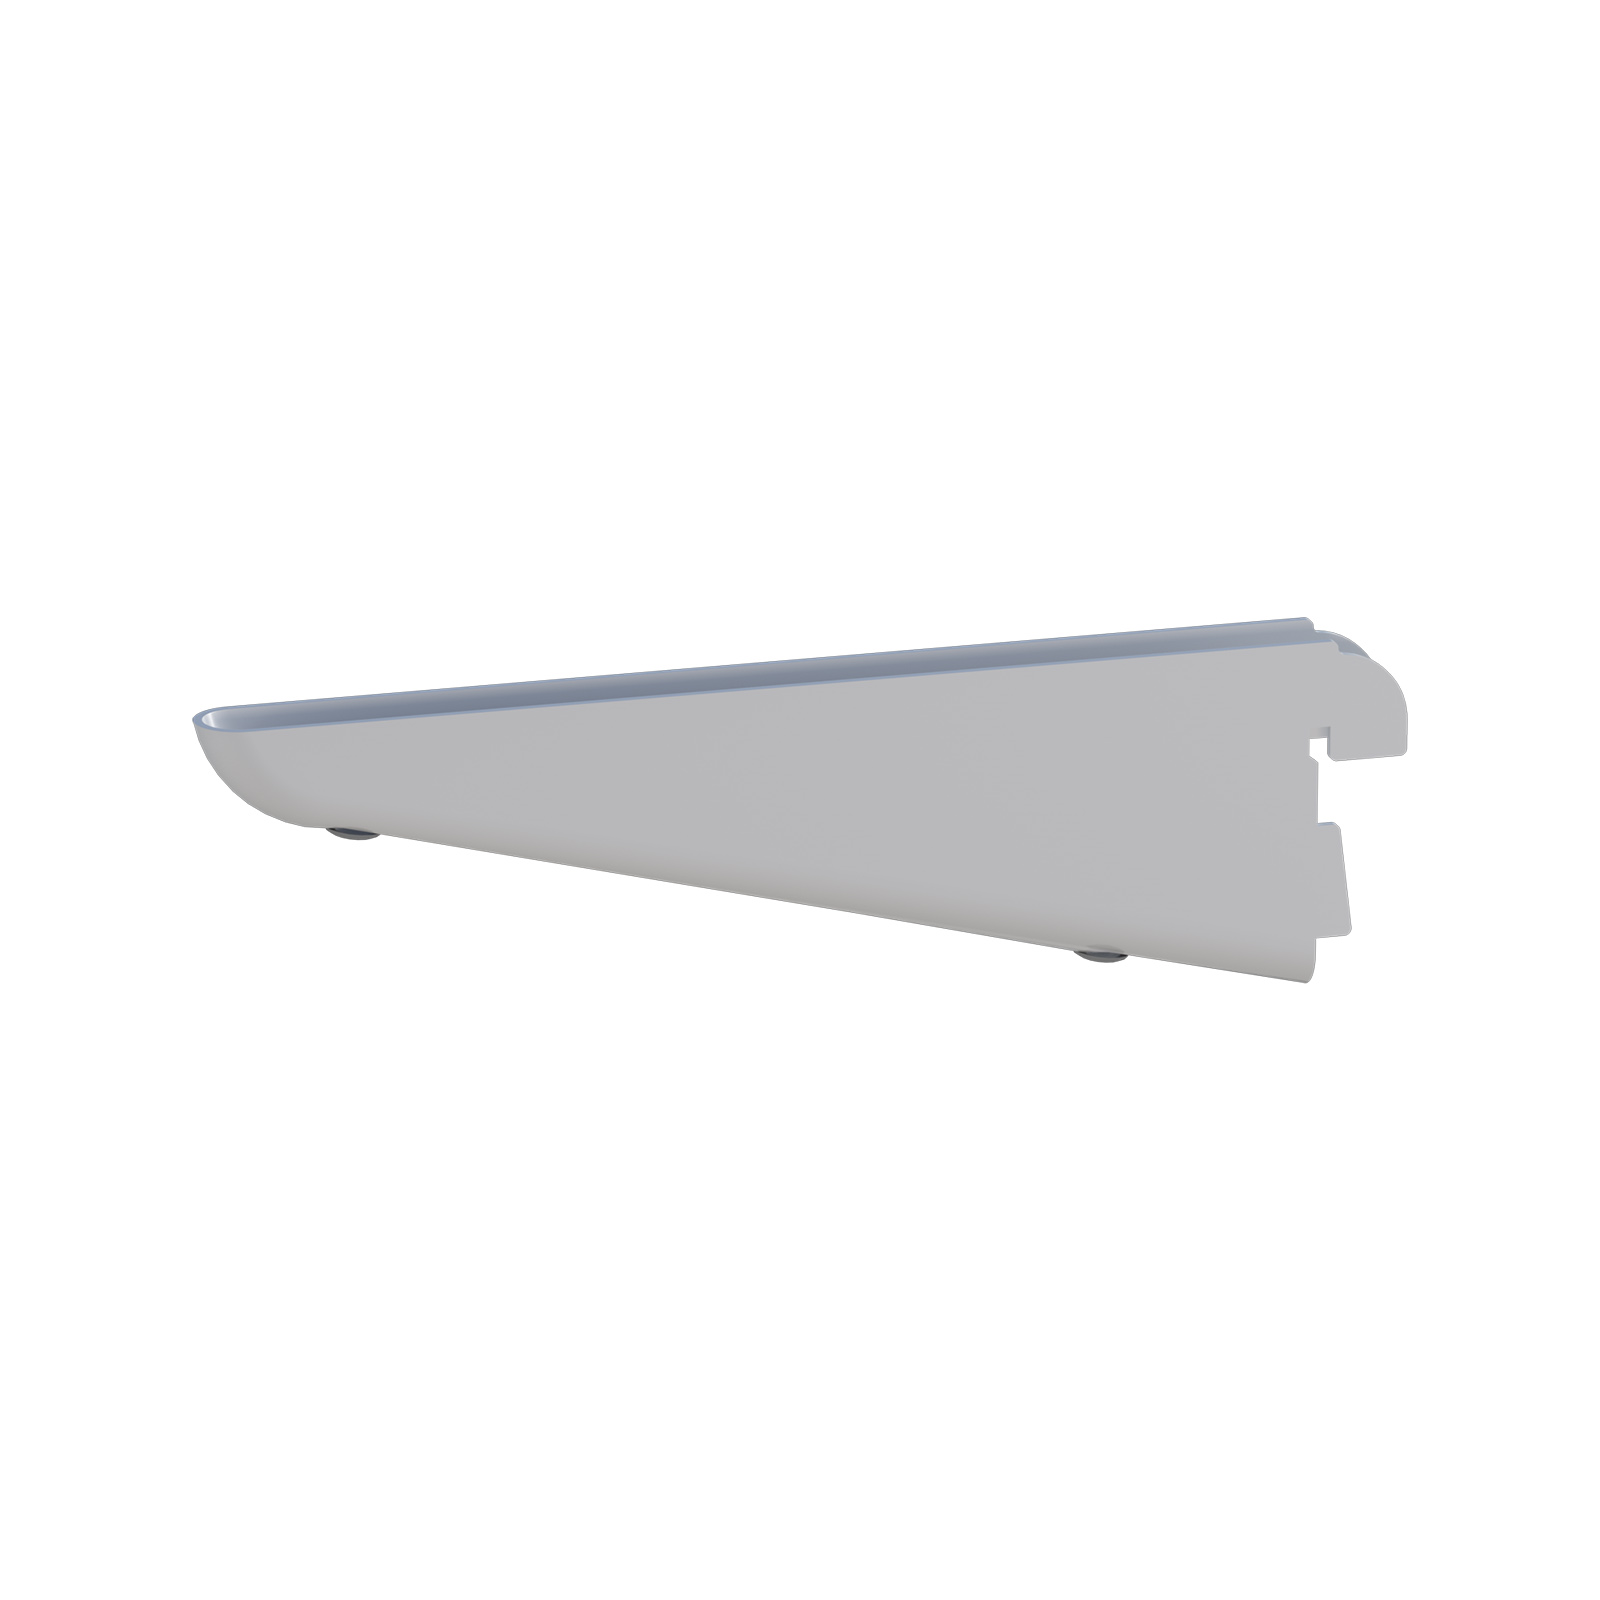 Home Solutions Double Slot Bracket White 170mm